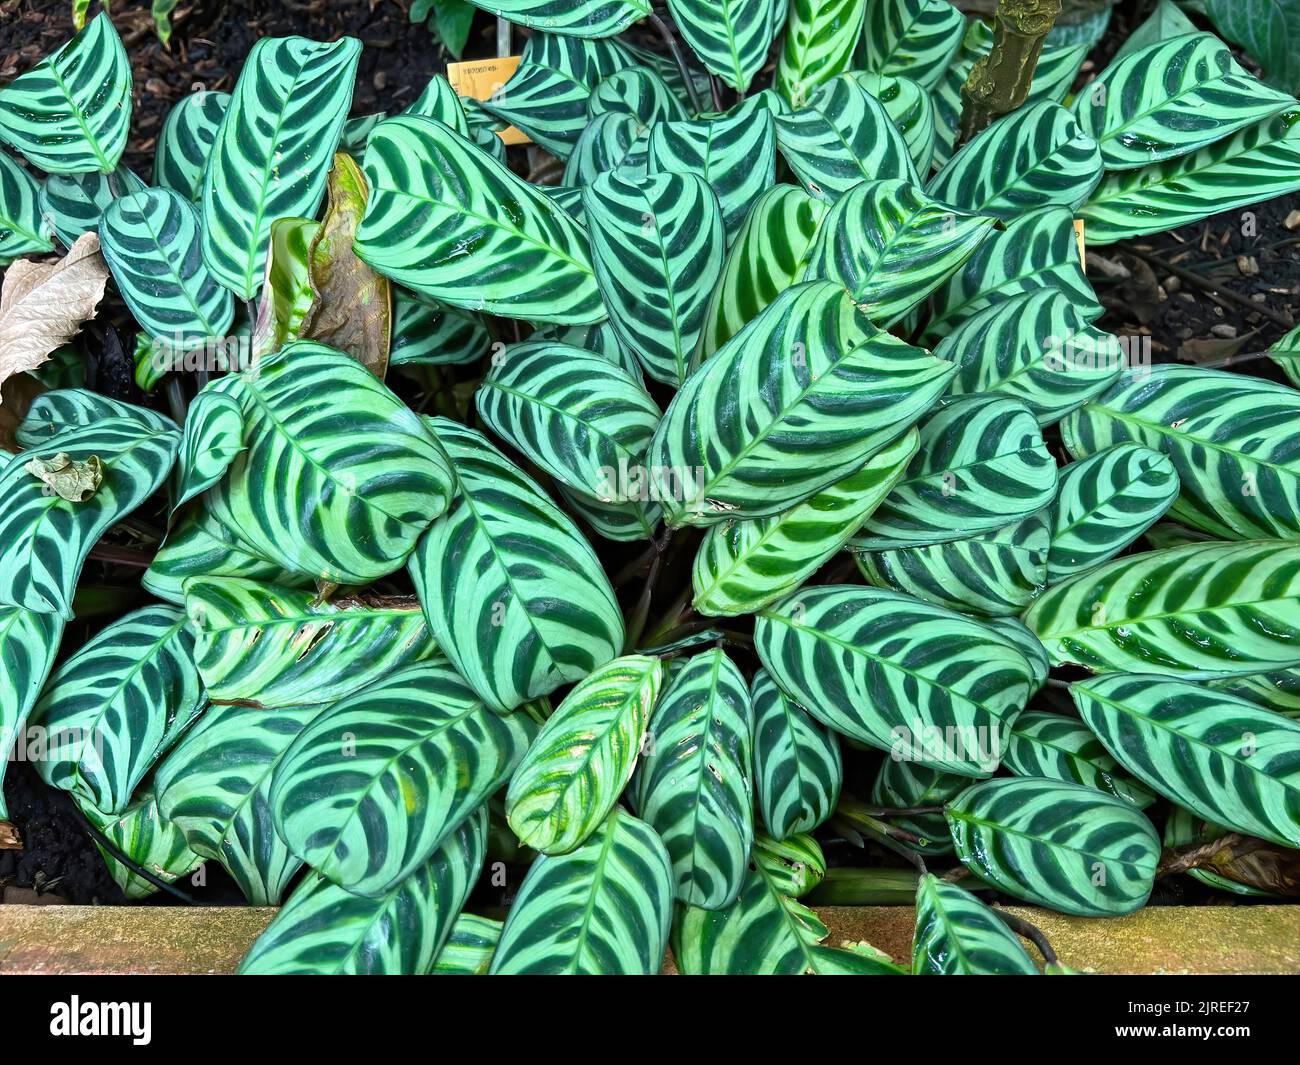 Closeup on the Brazilian fishbone prayer plant , Ctenanthe burle-marxii with it's typical oval striped patterned foliage Stock Photo